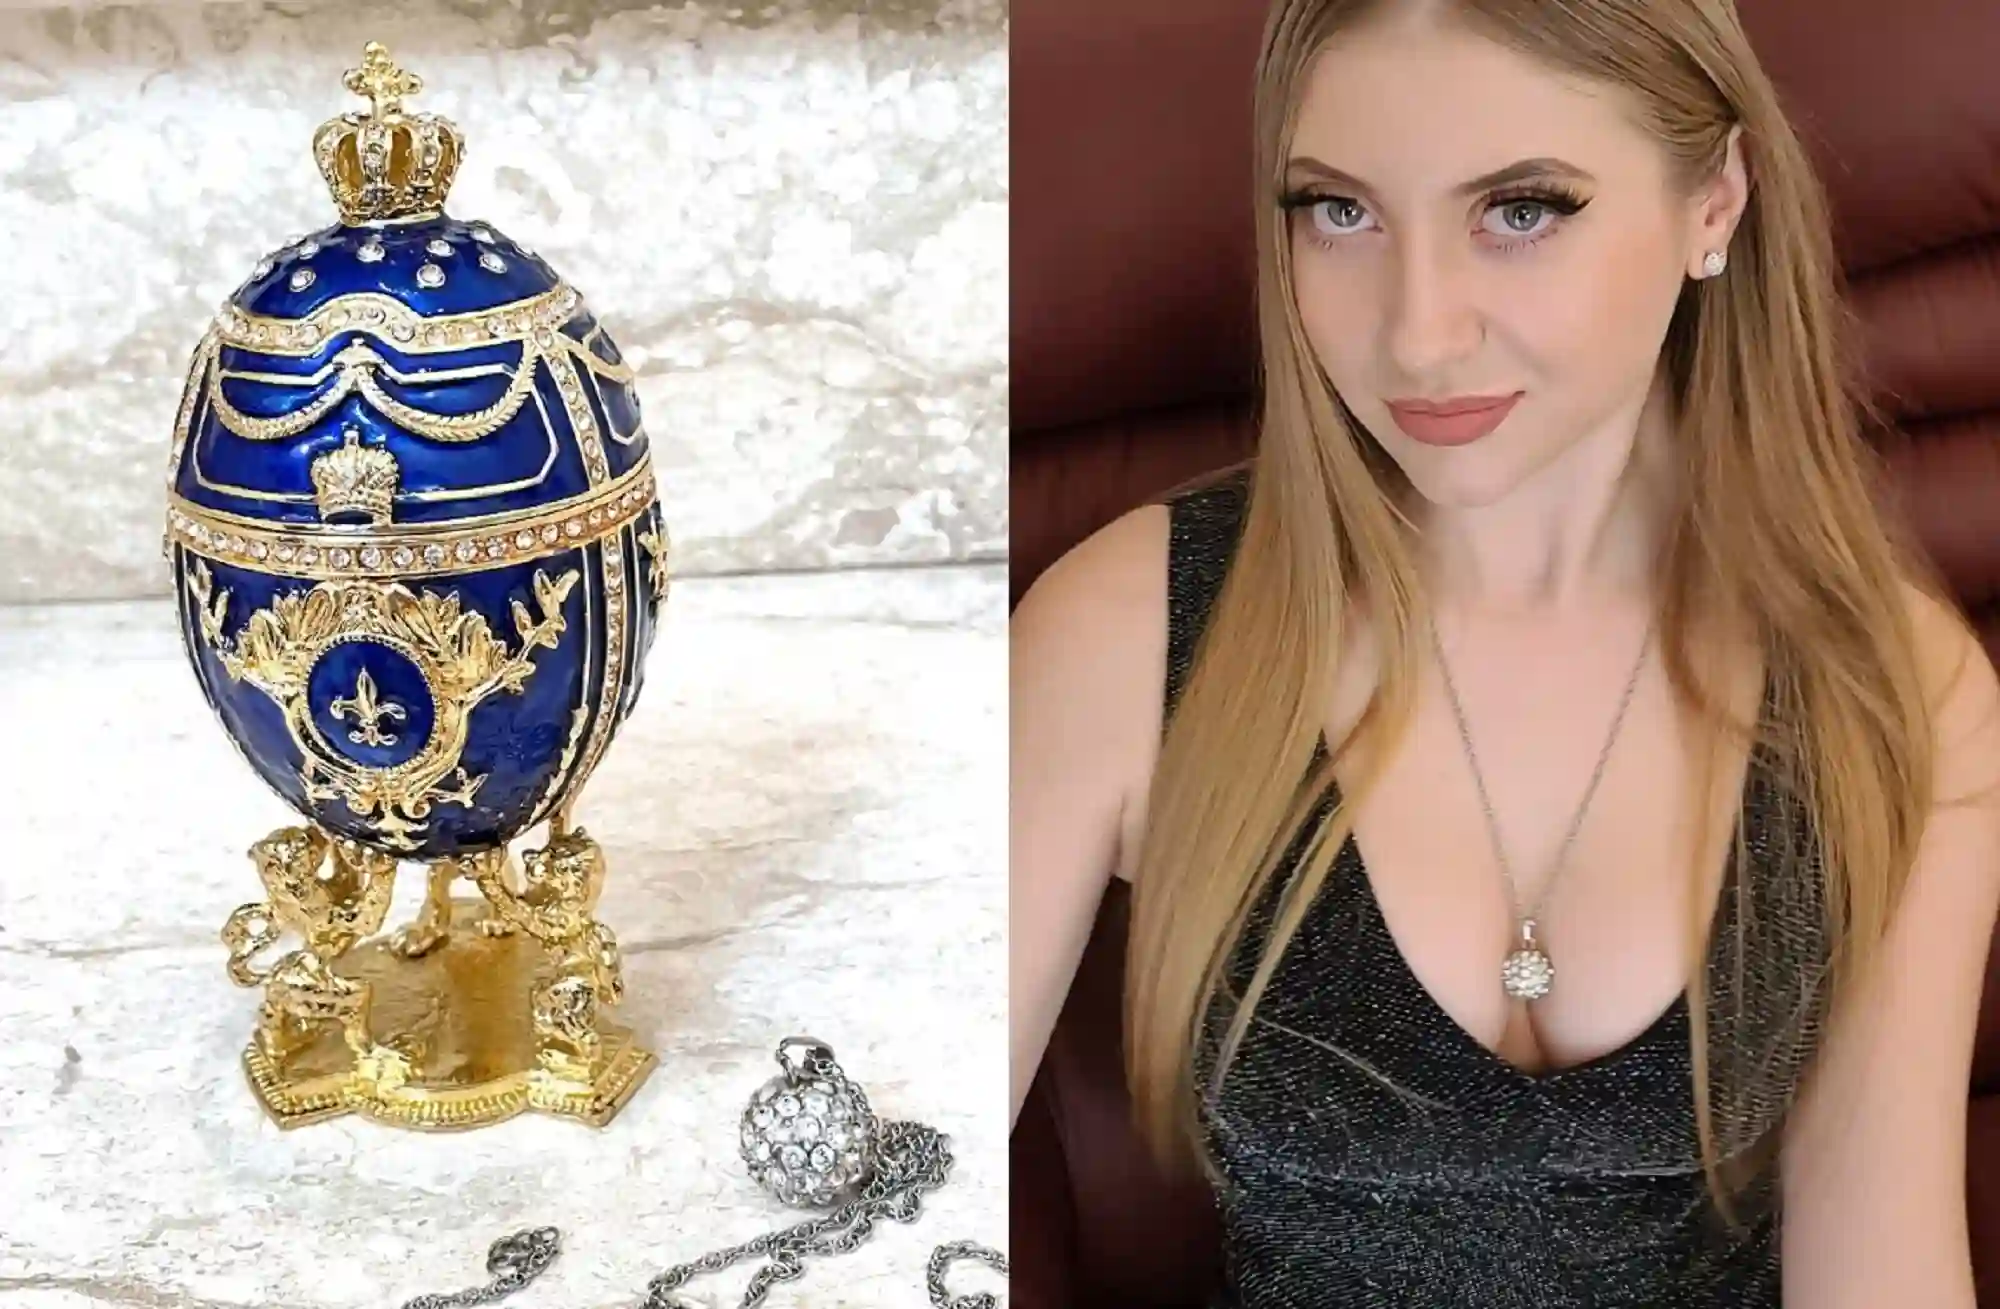 Faberge Egg Trinket Faberge Egg Ornaments Fabrege Egg Faberge style egg Gift for Her Carl Faberge PLUS Her HANDMADE Silver Diamond Necklace 